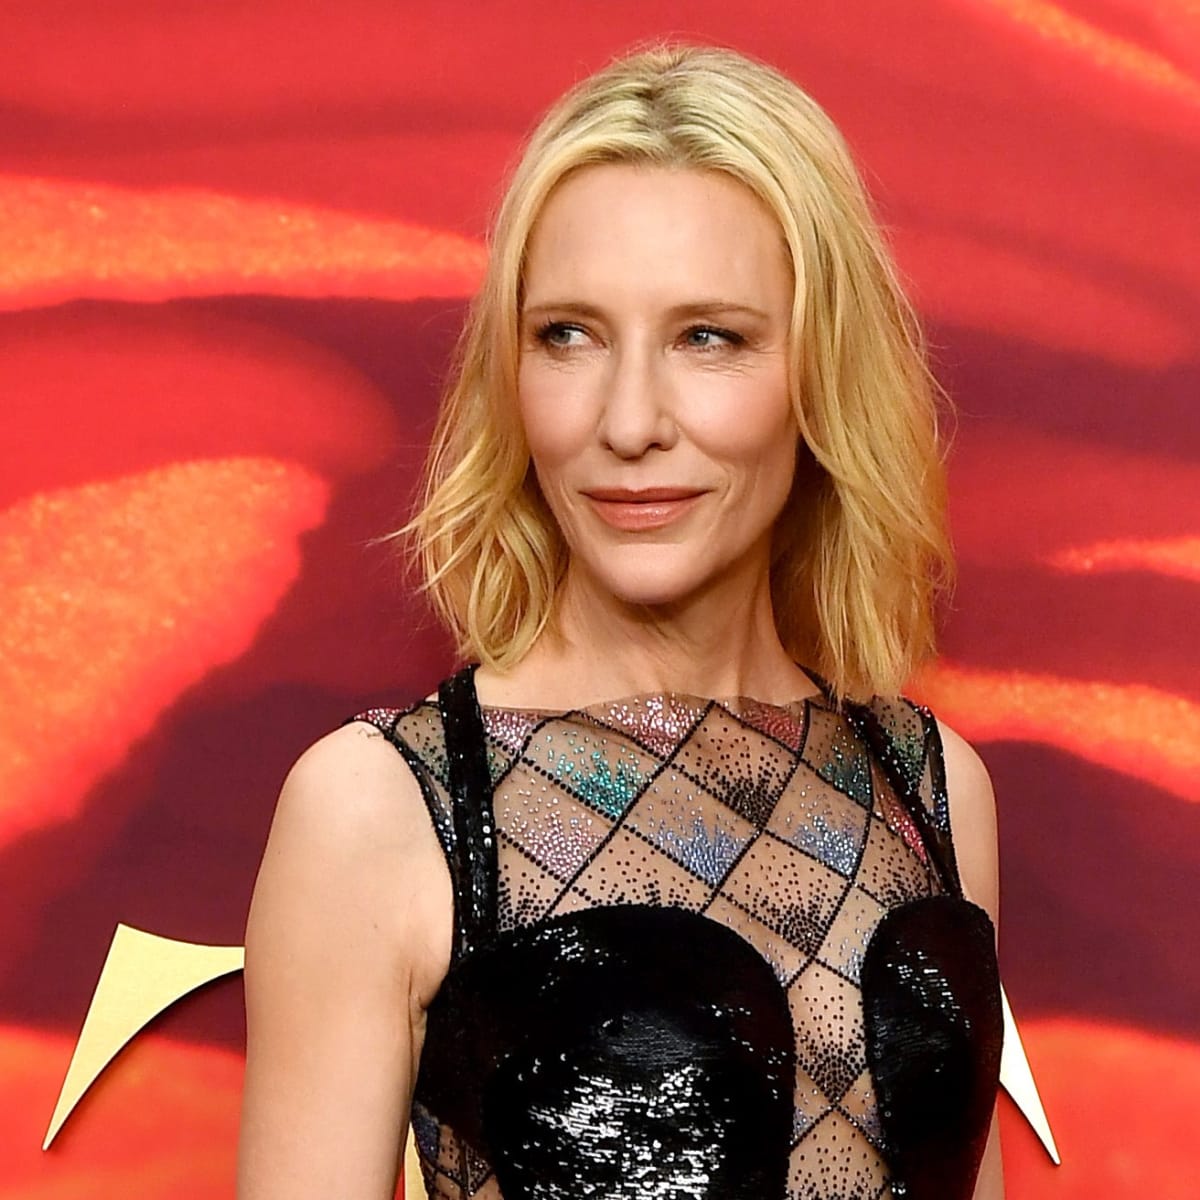 CATE BLANCHETT is the New Face of LOUIS VUITTON